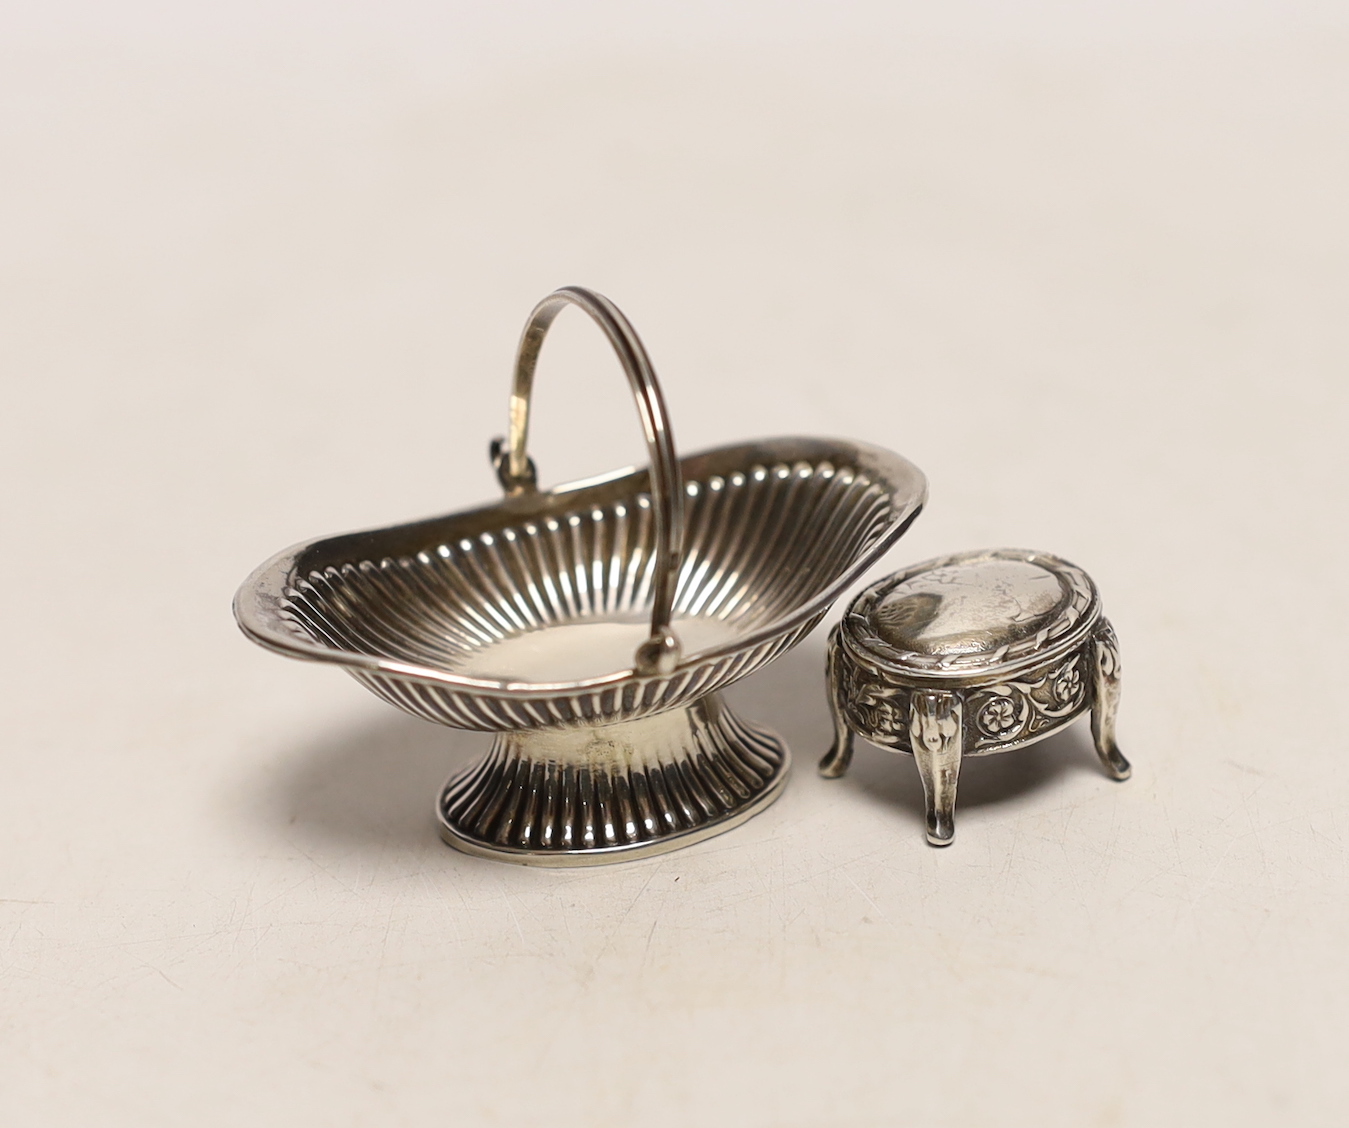 An Edwardian miniature silver model of a basket, by Levi & Salaman, Birmingham, 1907, 56mm, together with a miniature silver model of a table, import marks for London, 1901.